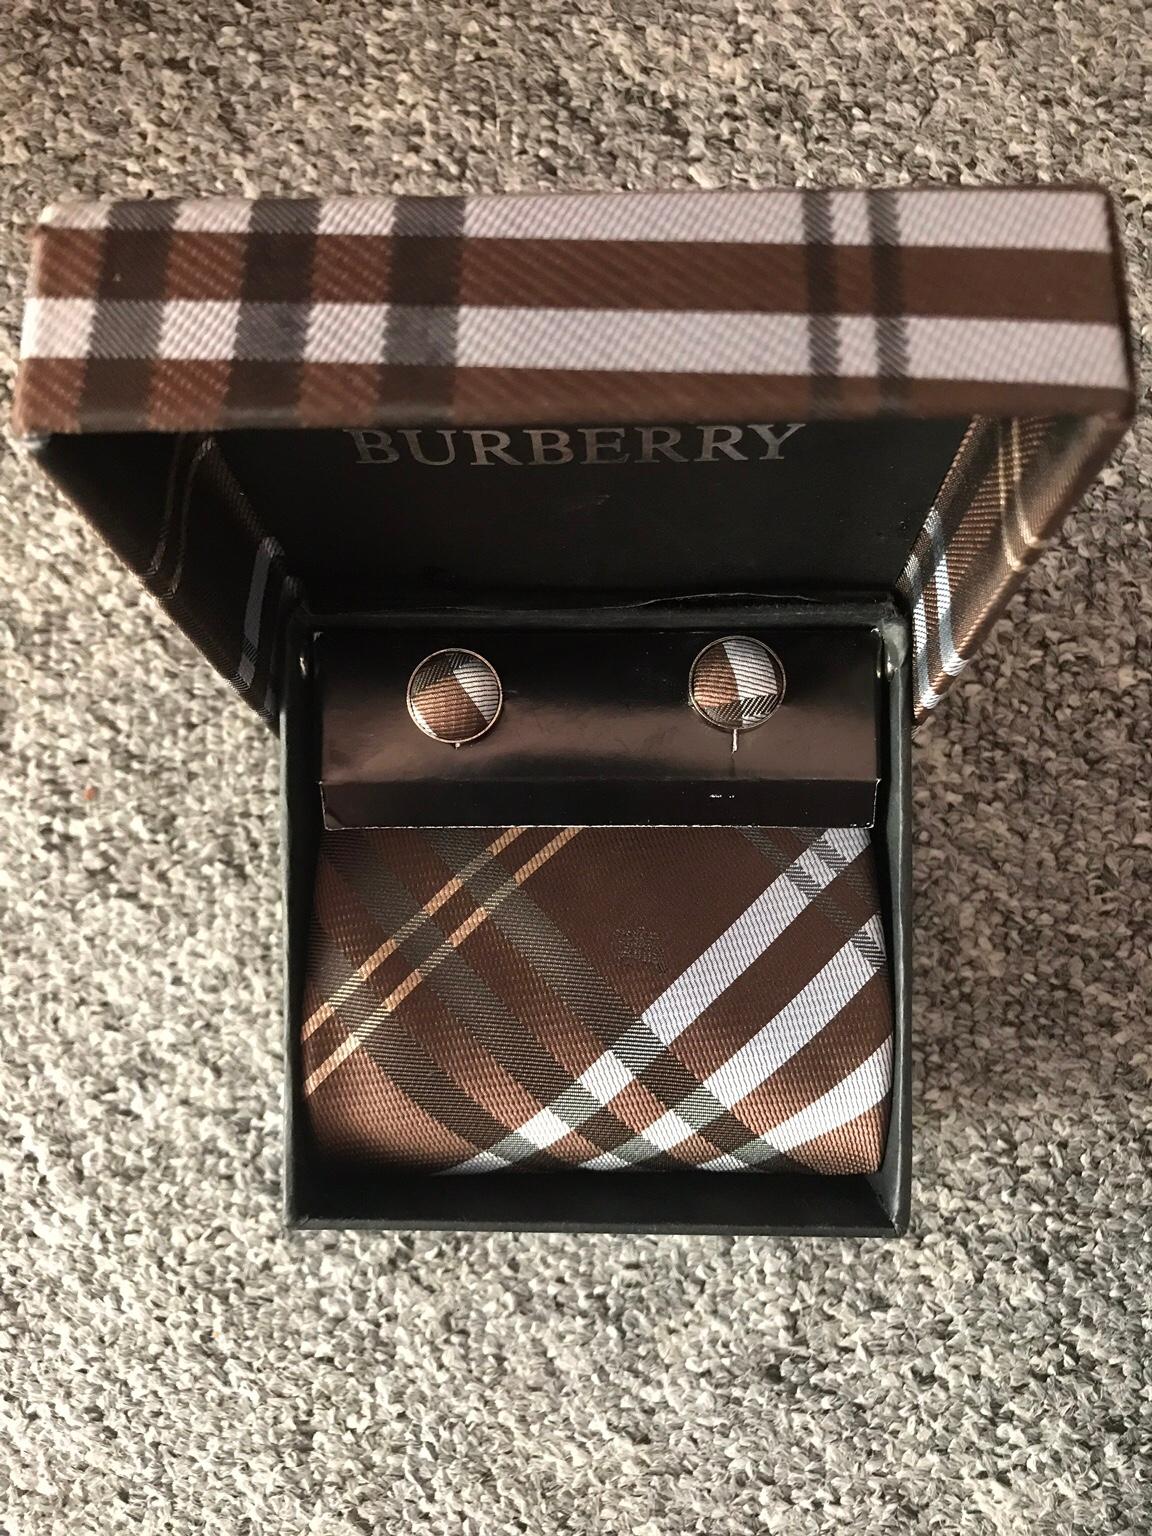 Burberry Tie, Pocket Square and 